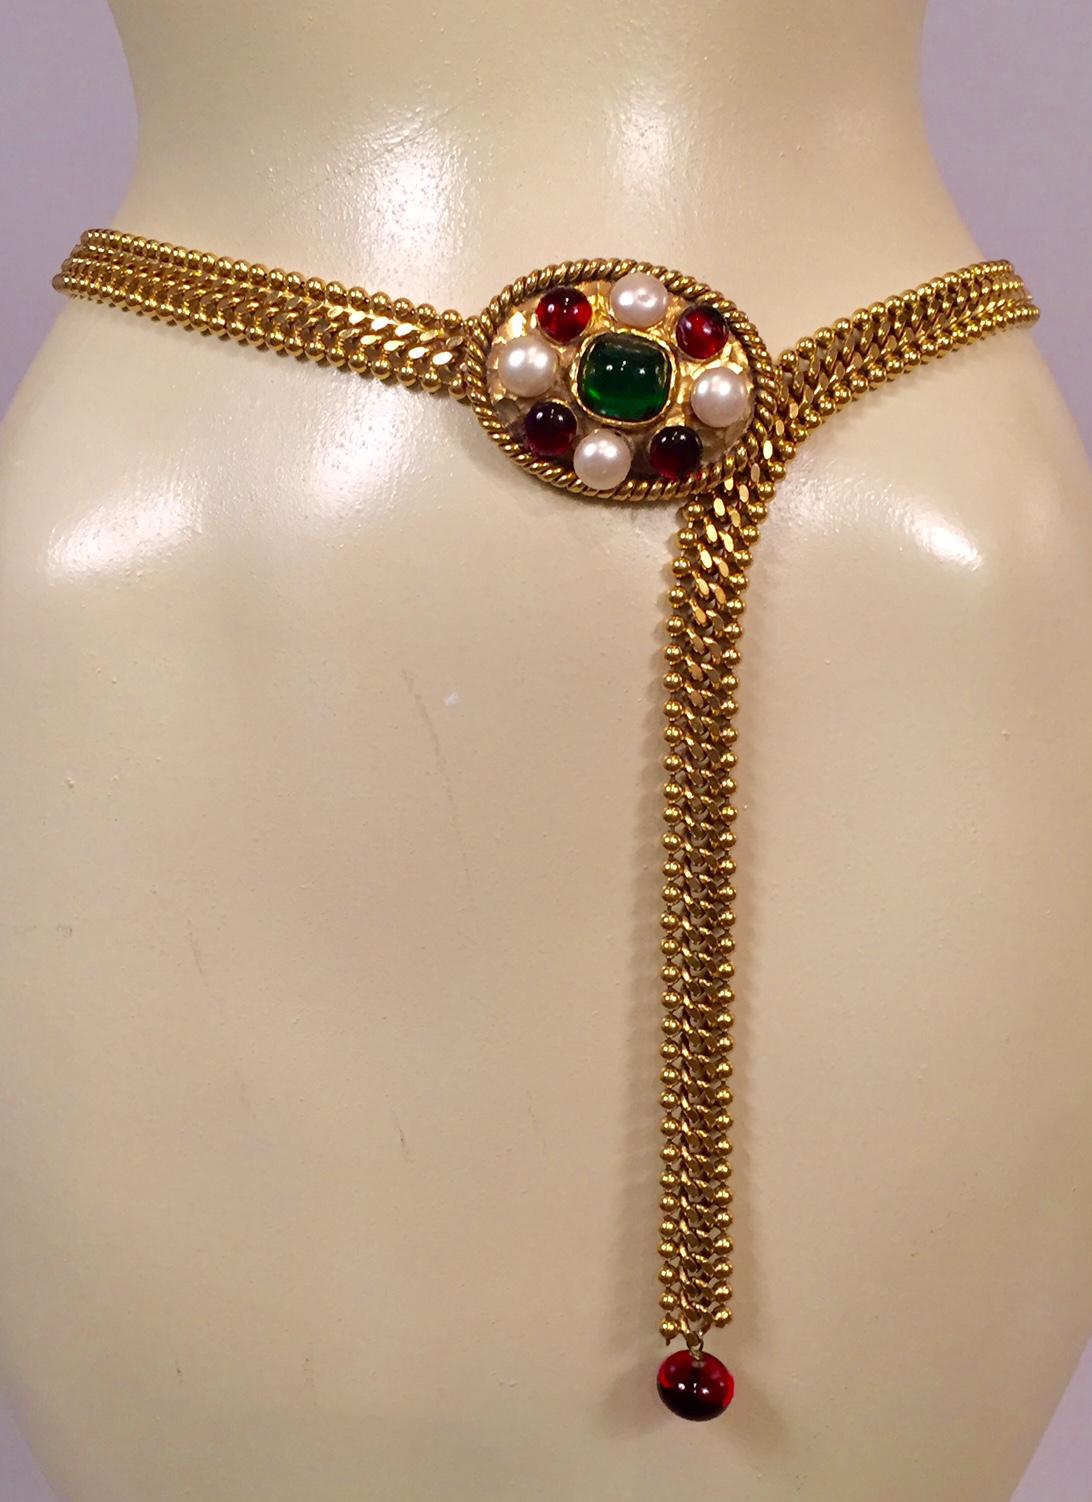 This statement making Chanel Couture belt is from the wardrobe of a former Chanel fashion executive. It is a gold chain belt with an oval belt buckle set with a large Gripoix green cabochon stone at the center. This is surrounded with four ruby red